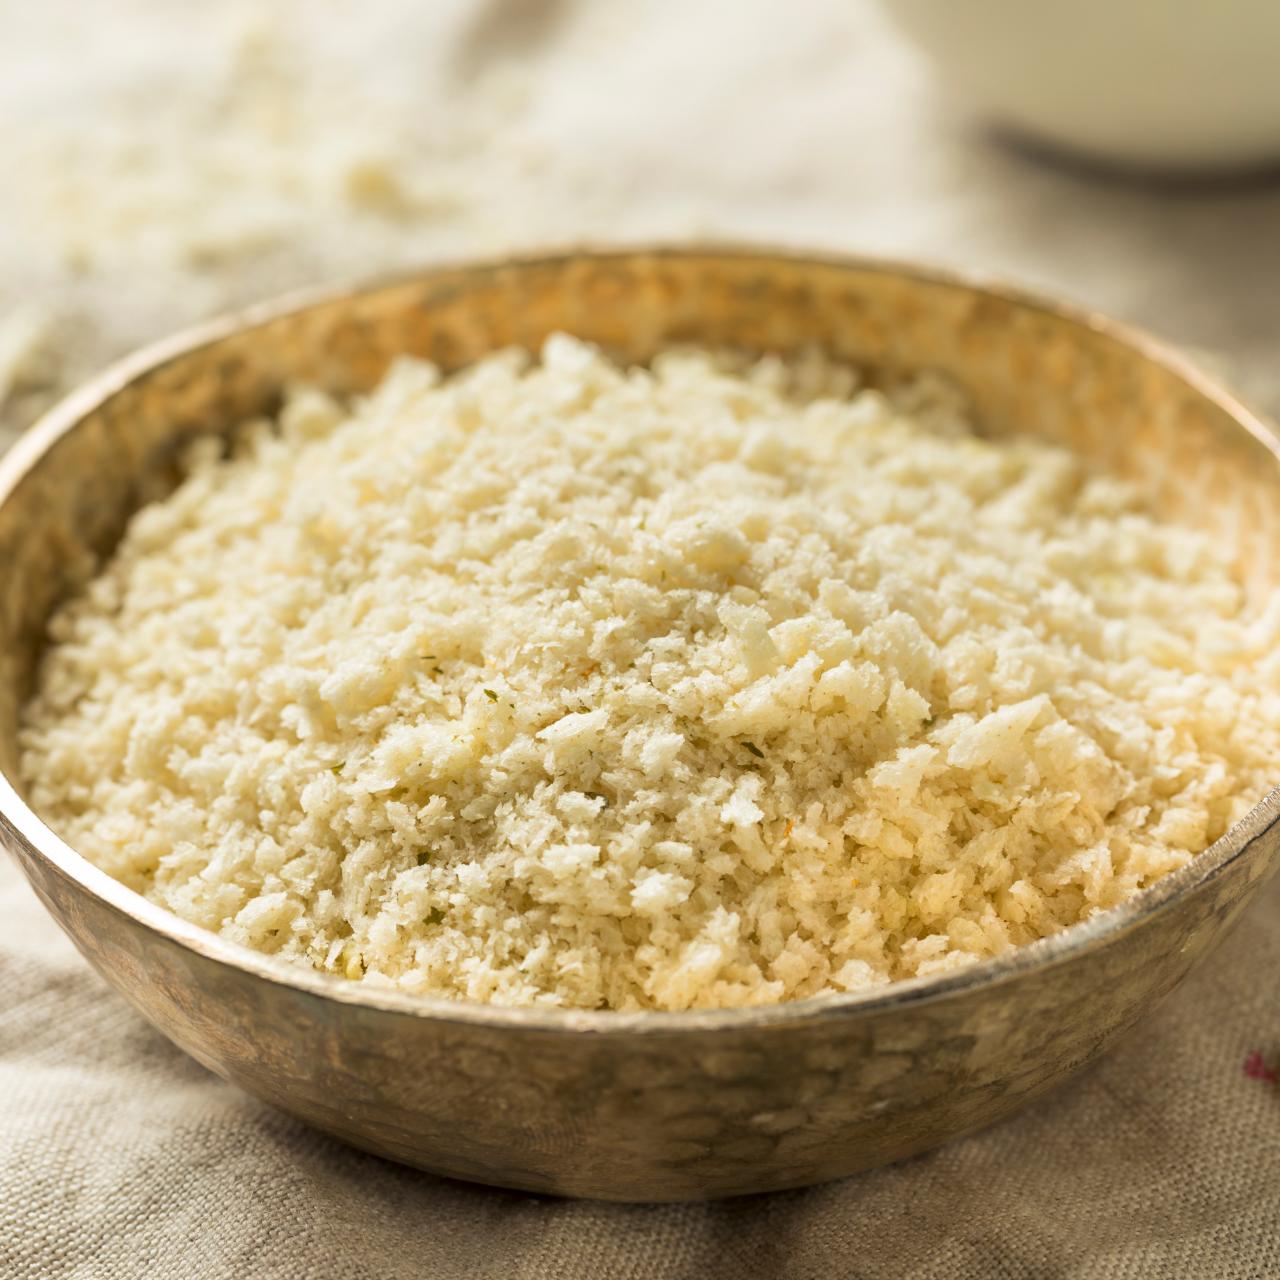 What Is Panko and How to Cook with It?